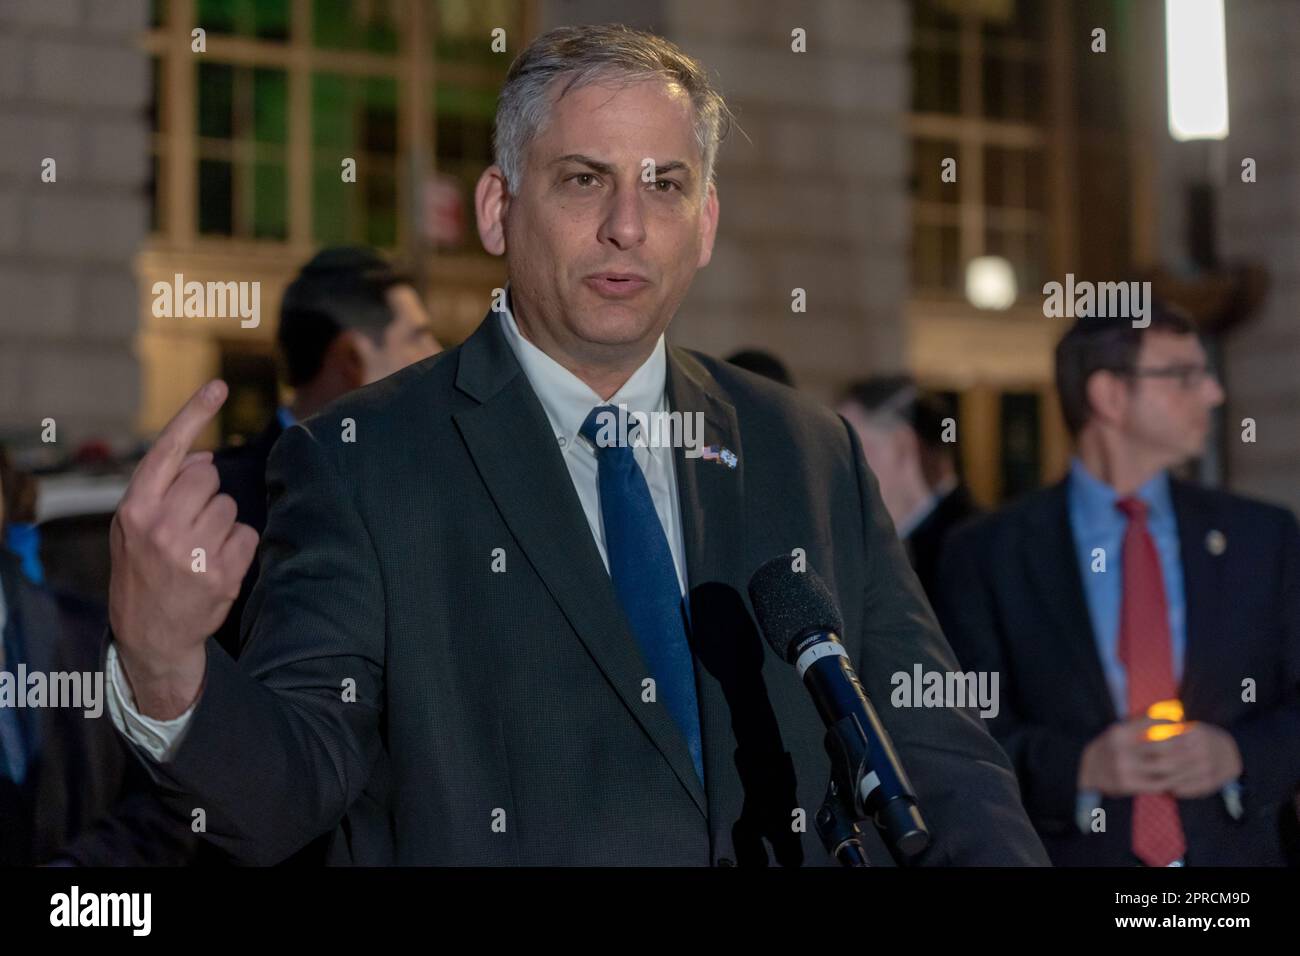 New York, United States. 26th Apr, 2023. NEW YORK, NEW YORK - APRIL 26: Israel's Acting Consul General in New York Israel Nitzan speaks during an Israeli flag-raising ceremony at Bowling Green Park as Israel celebrates its 75th Independence Day 'Yom Haatzmaut' on April 26, 2023 in New York City. Yom Haatzmaut aka Israel Independence Day, celebrates the establishment of the State of Israel by Jewish leadership headed by Prime Minister David Ben-Gurion on May 14, 1948, however it is celebrated on the day according to the Jewish Calendar. Credit: Ron Adar/Alamy Live News Stock Photo